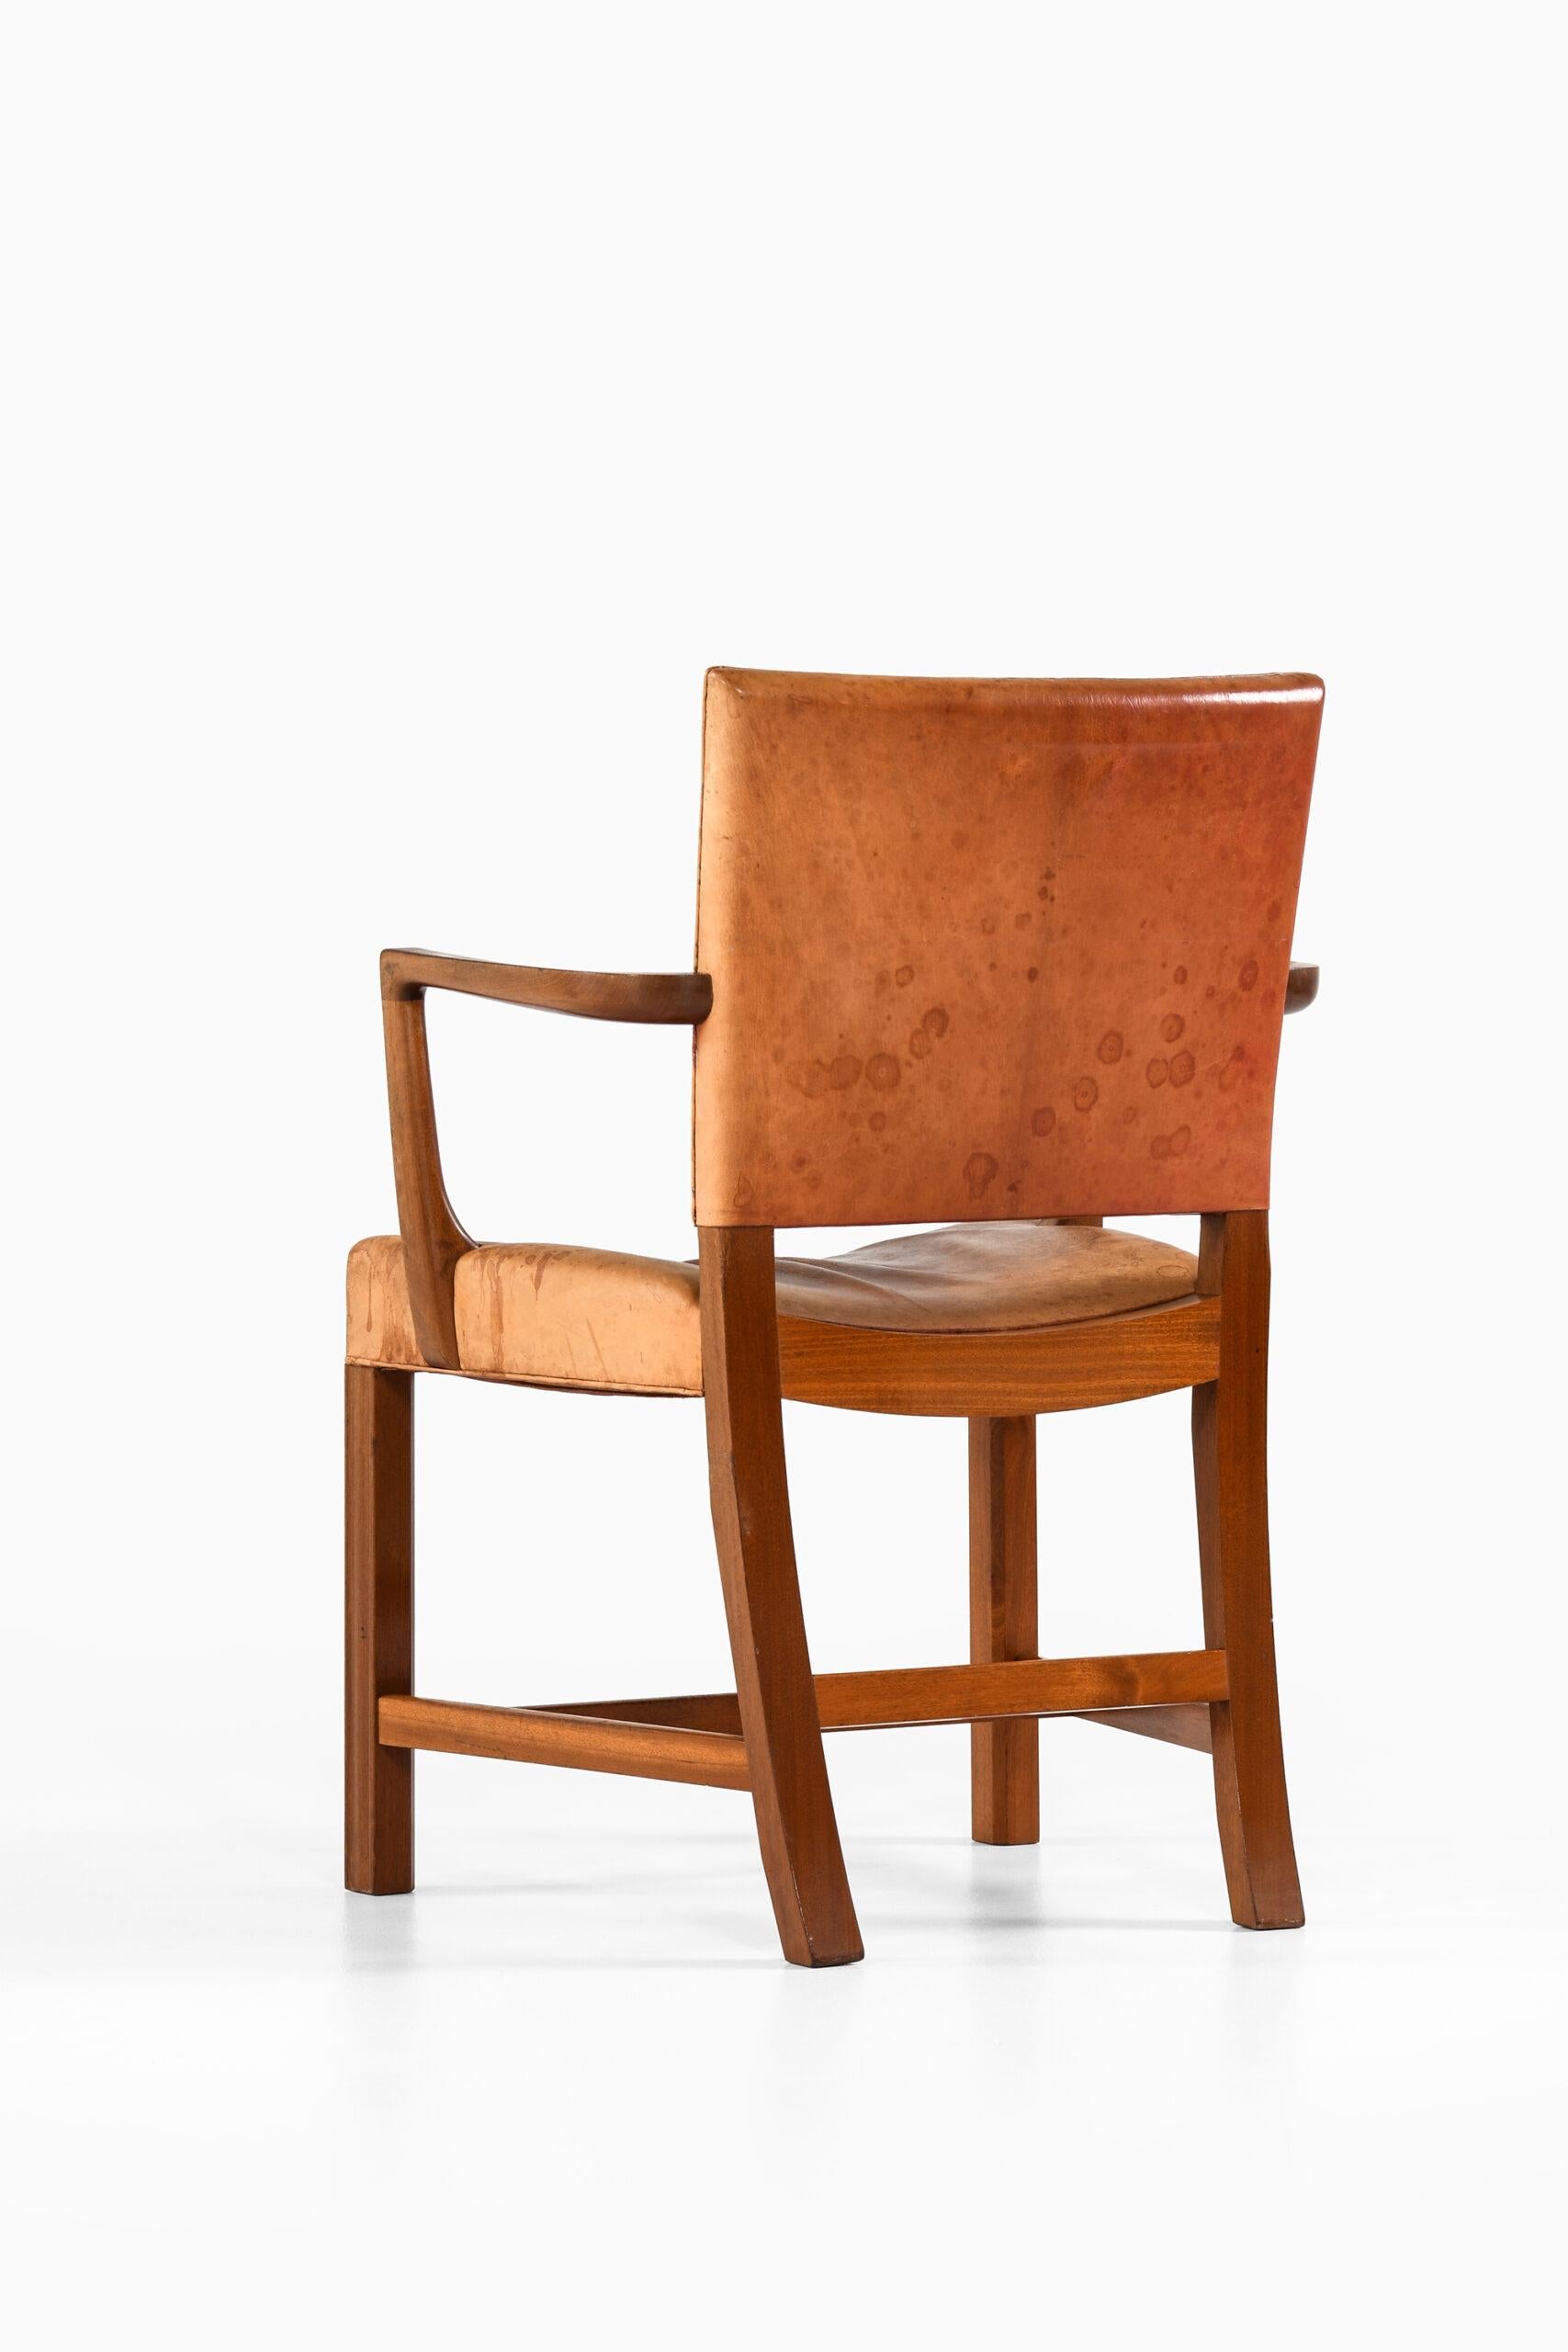 Kaare Klint Armchair Model No 3758A / ‘The Red Chair’ Produced by Rud. Rasmussen For Sale 1